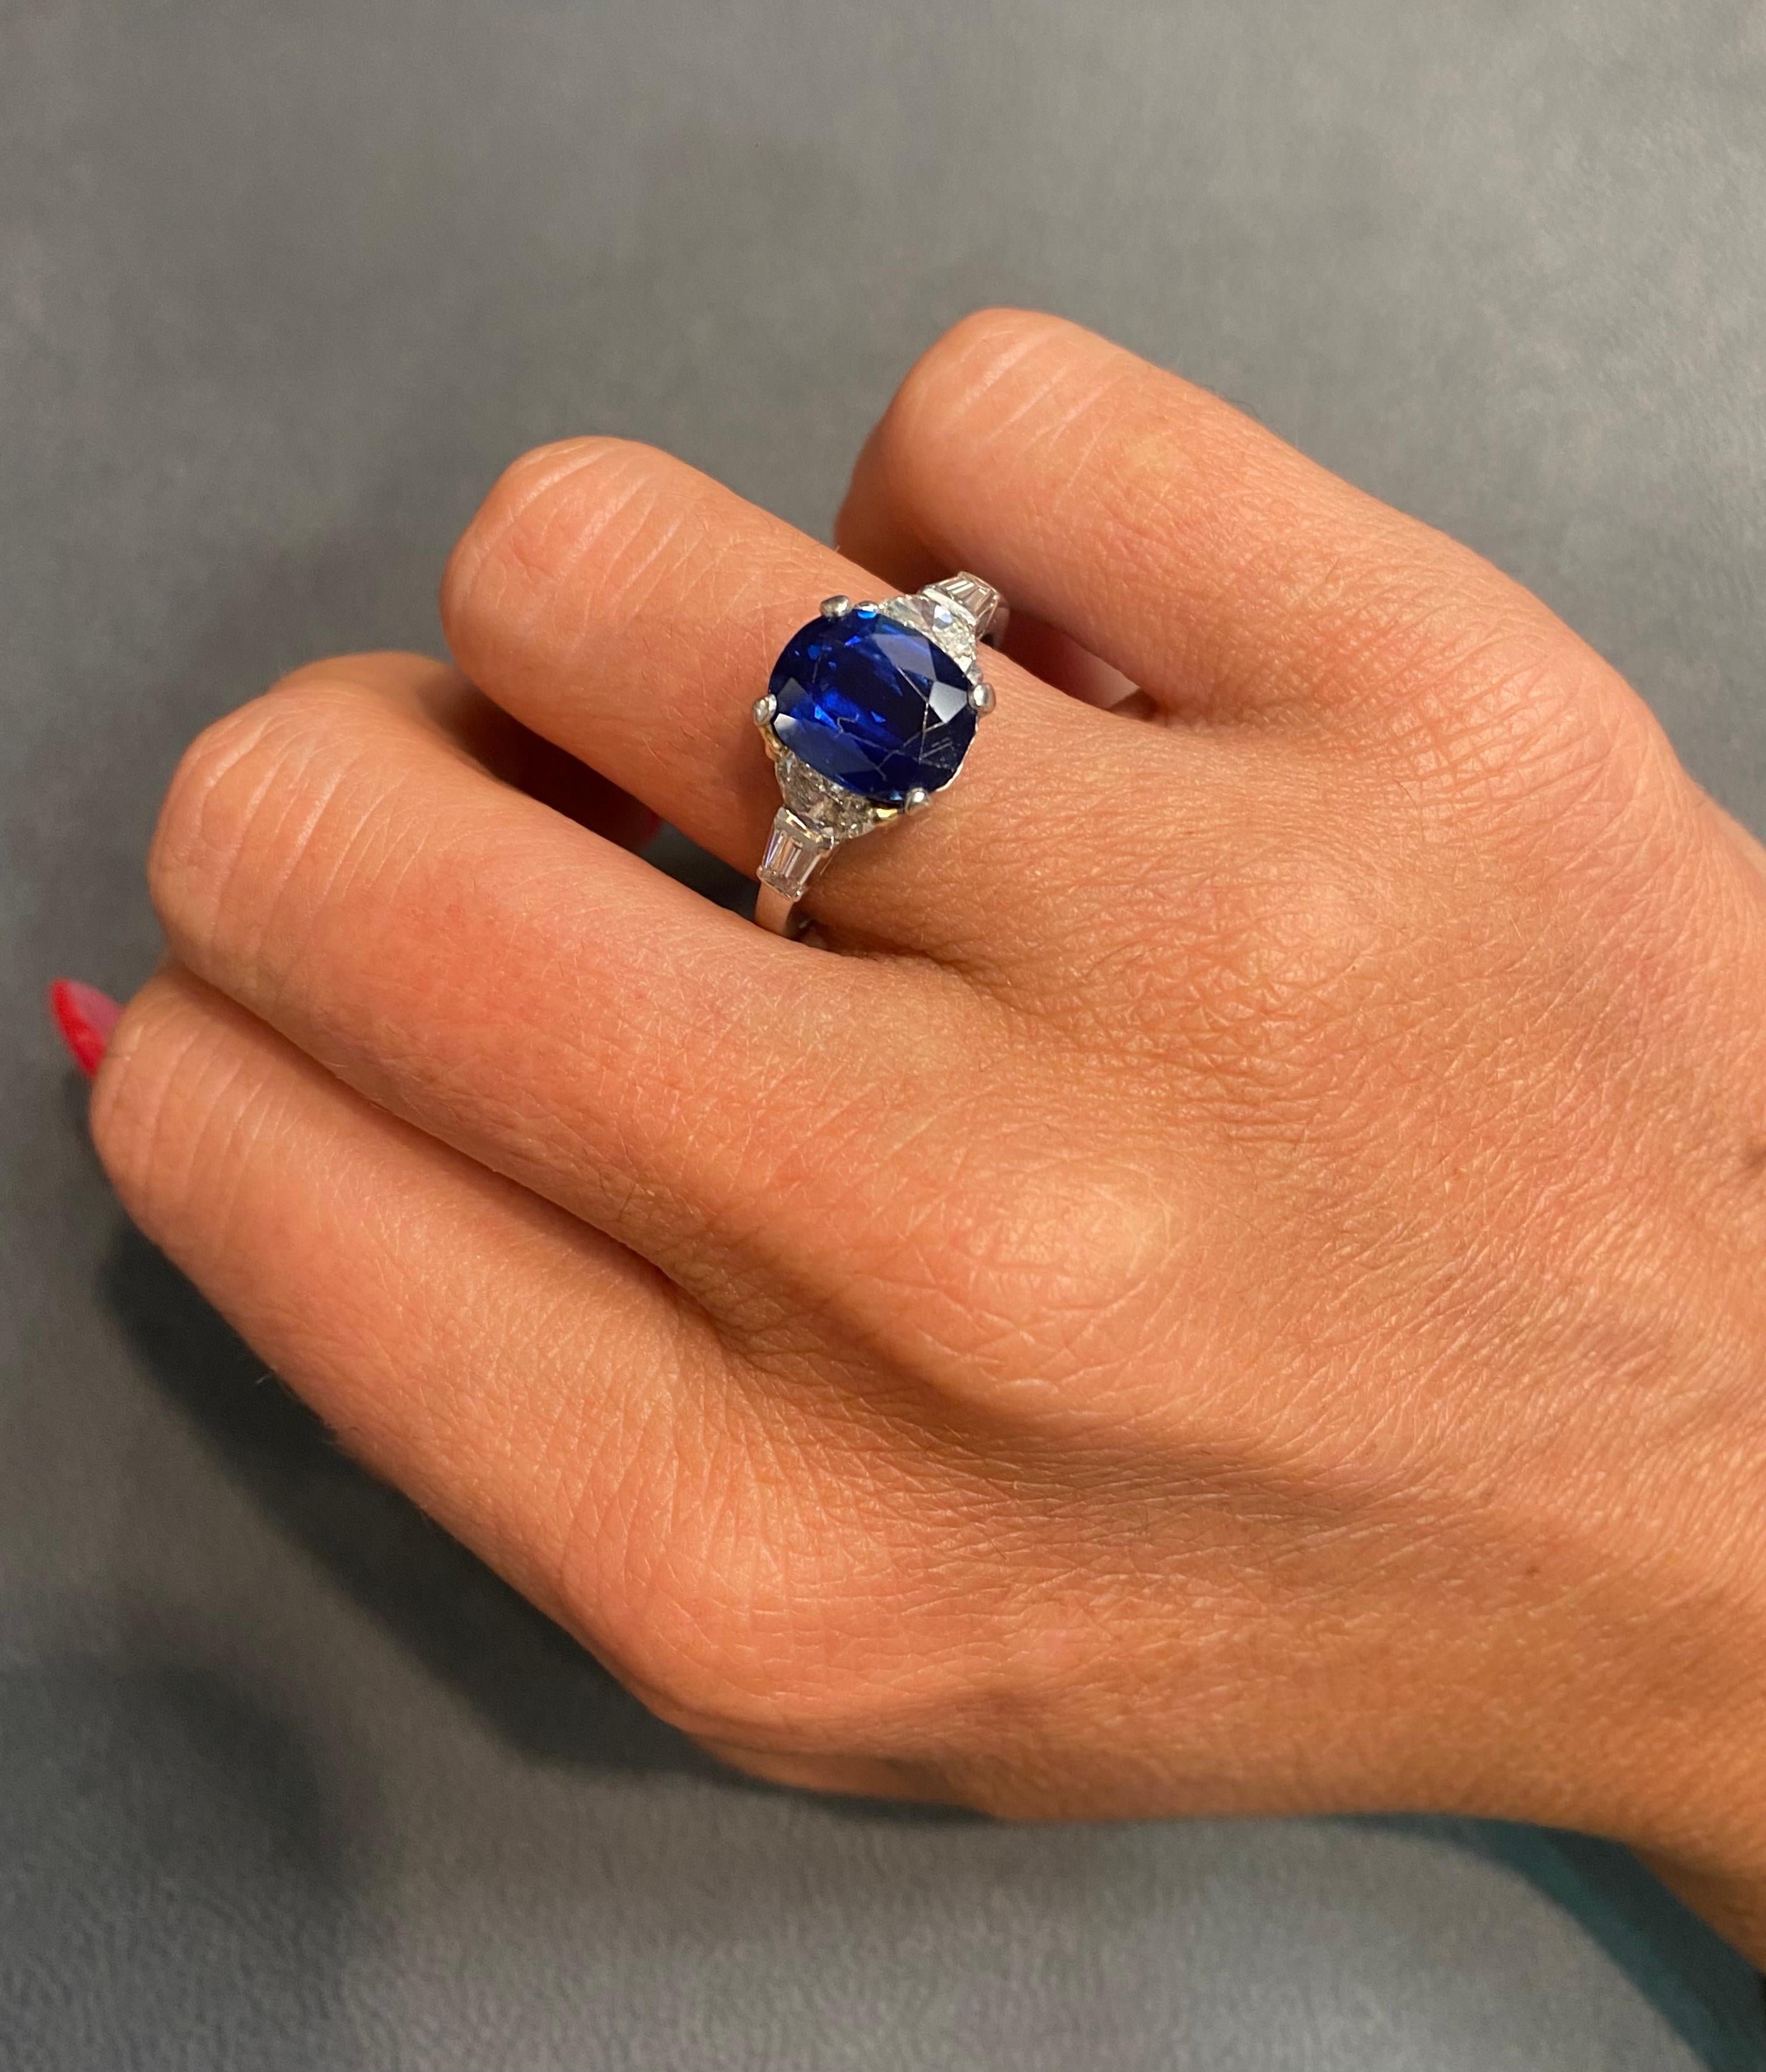 Oval Sapphire & Diamond Ring

A platinum ring set with an oval cut sapphire, 2 half moon cut diamonds, and 2 baguette cut diamonds

Accompanied by an AGL report stating that the sapphire is of Thai origin and is heated

Stamped Fougeray and 10% IRID